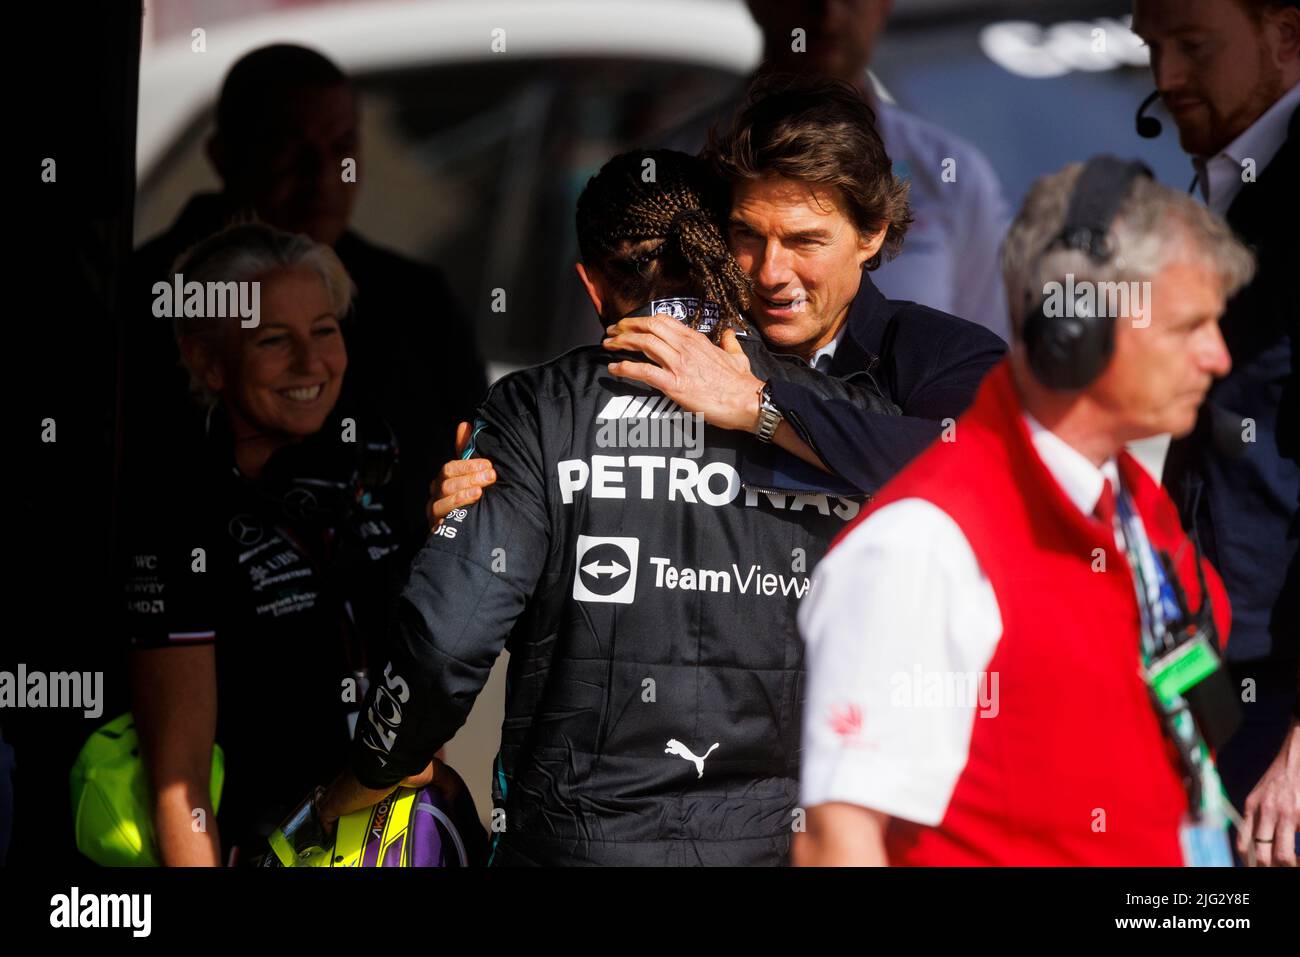 Tom Cruise hugs and consoles Lewis Hamilton underneath the podium at the F1 British Grand Prix as he finishes third whilst Carlos Sainz wins his first Stock Photo